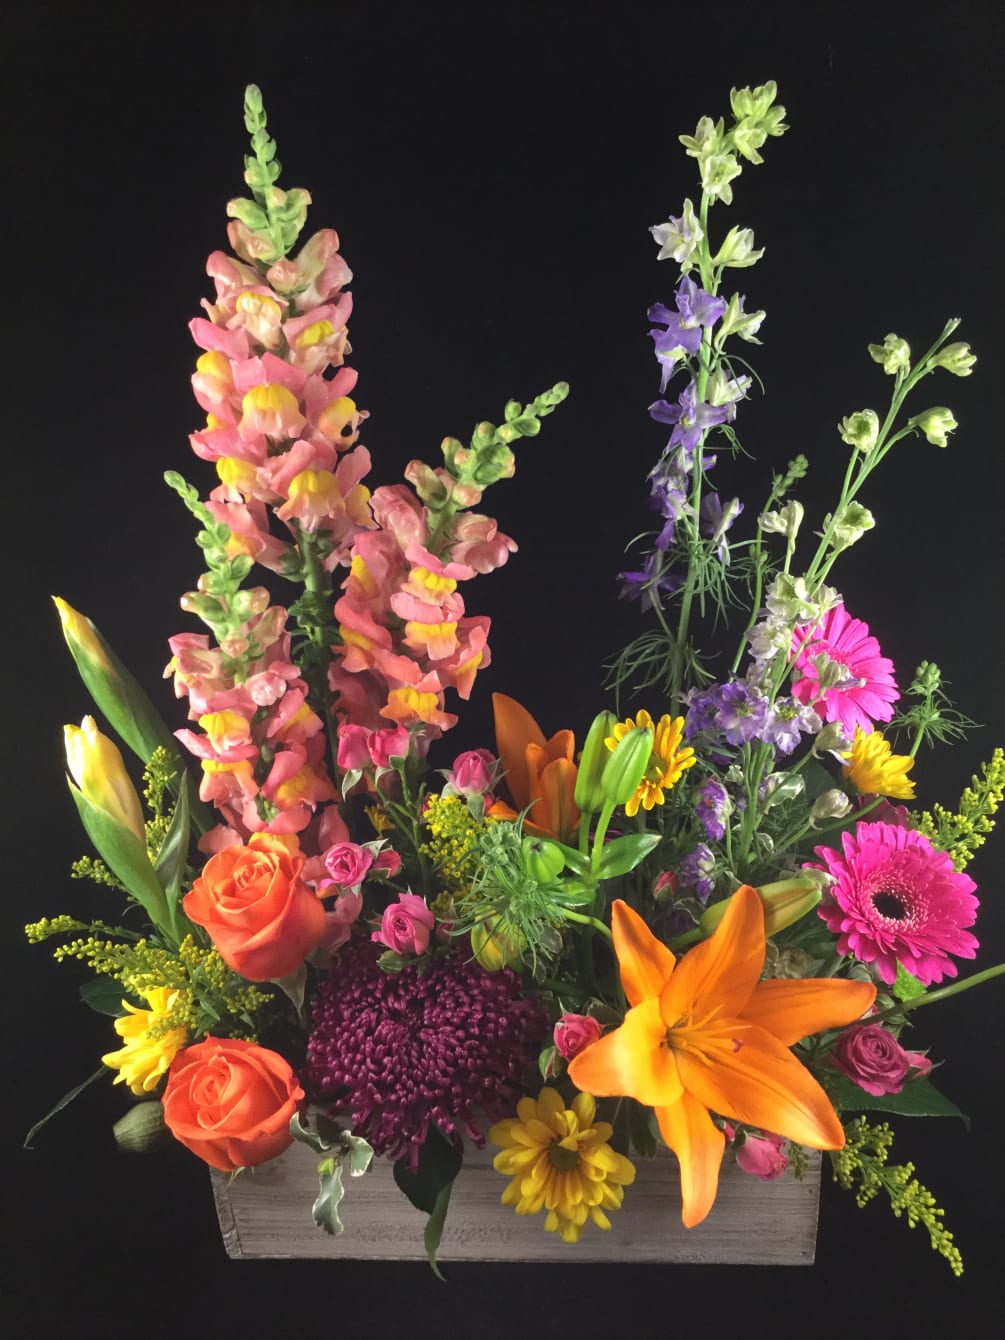 This delightful arrangement is like a breath of fresh air! Colorful seasonal